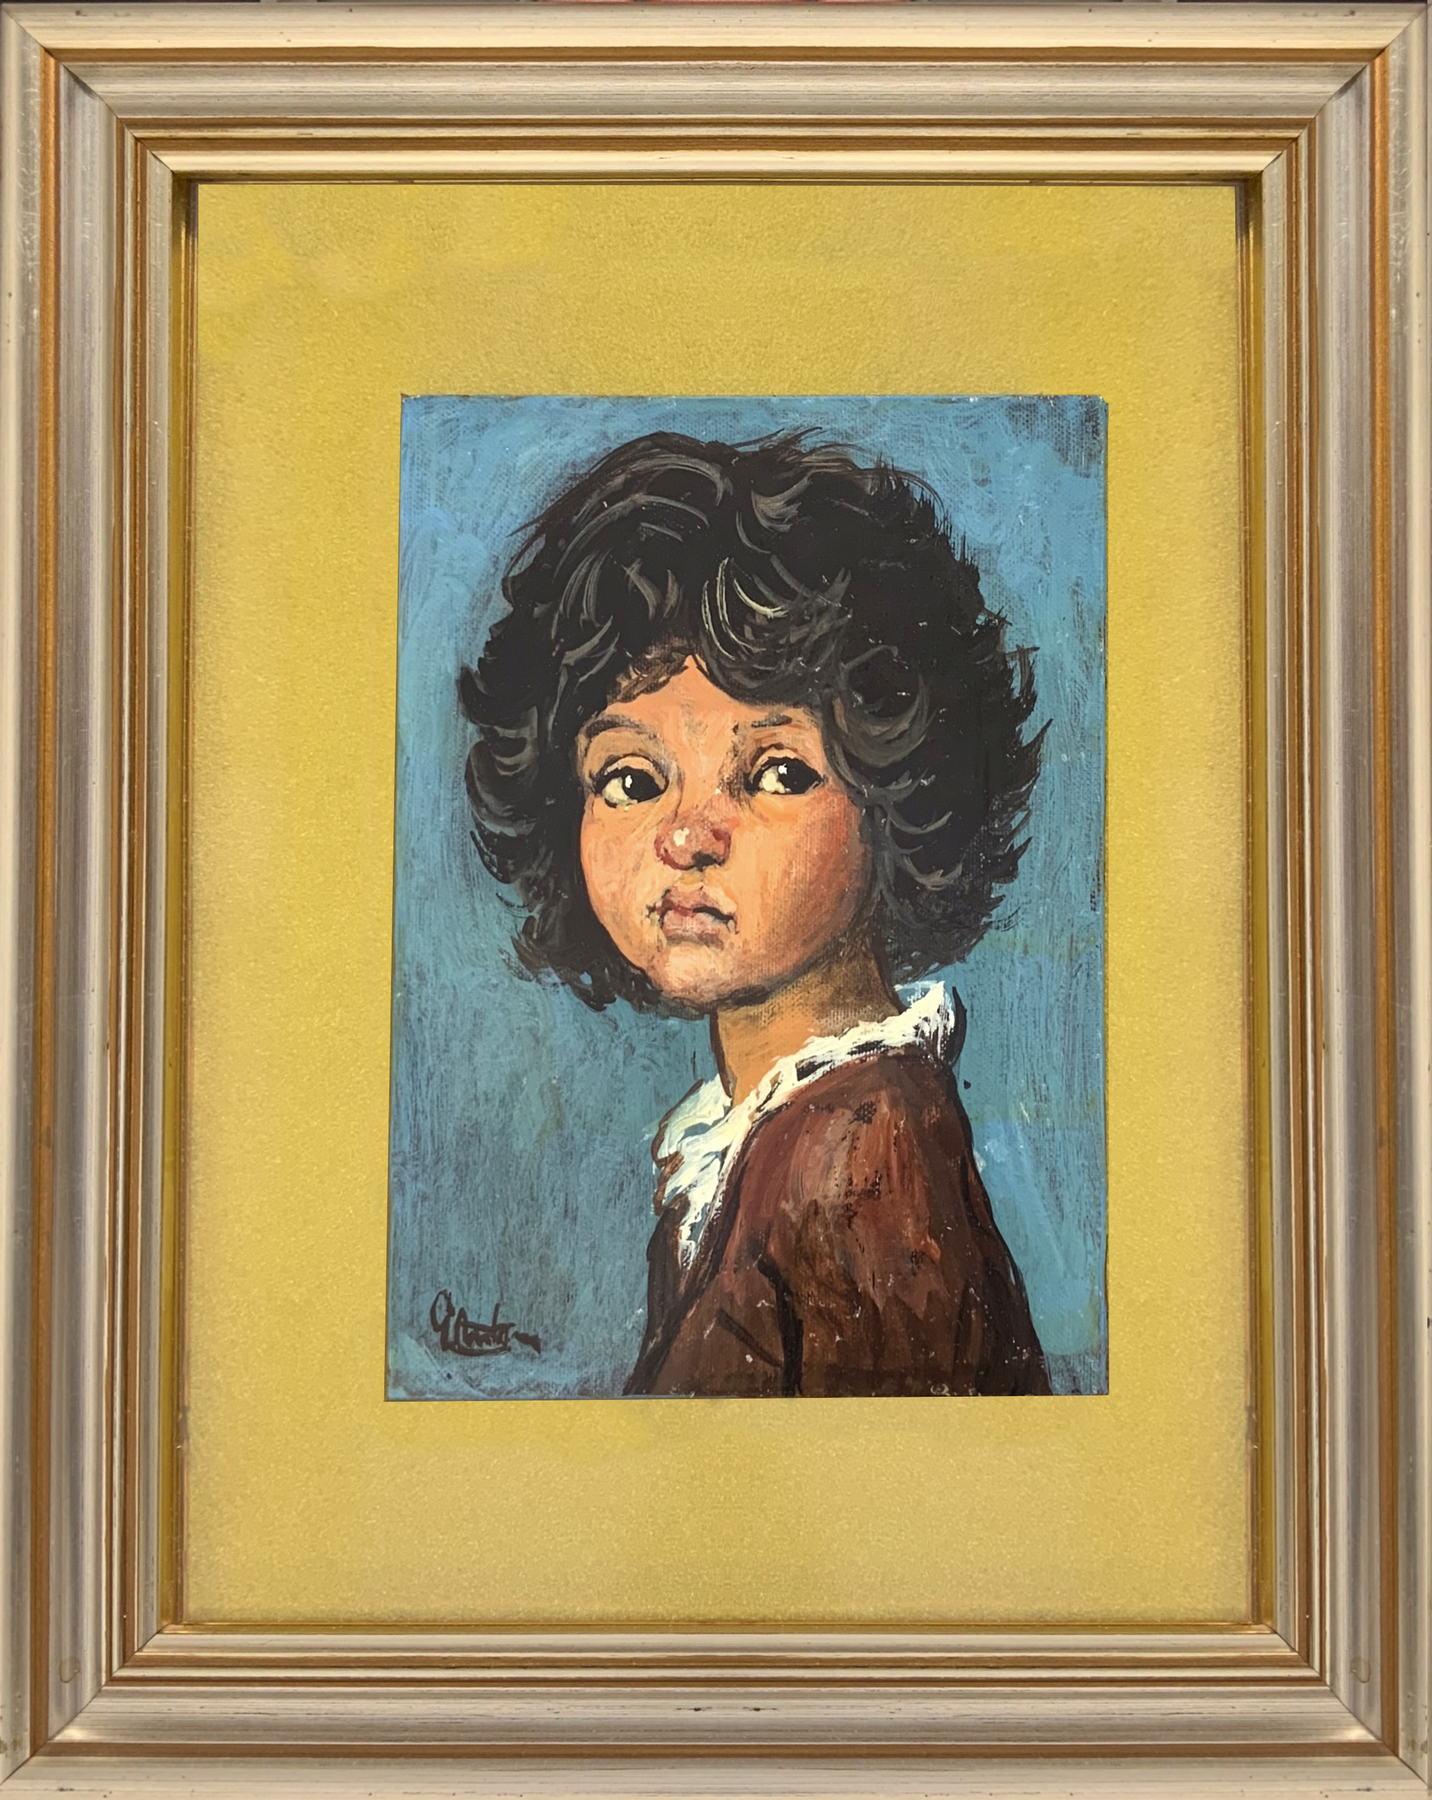 Oil painting on panel depicting a baby face, signed on the lower left Gianfranco Antoni (Firenze, 19 - Image 2 of 3